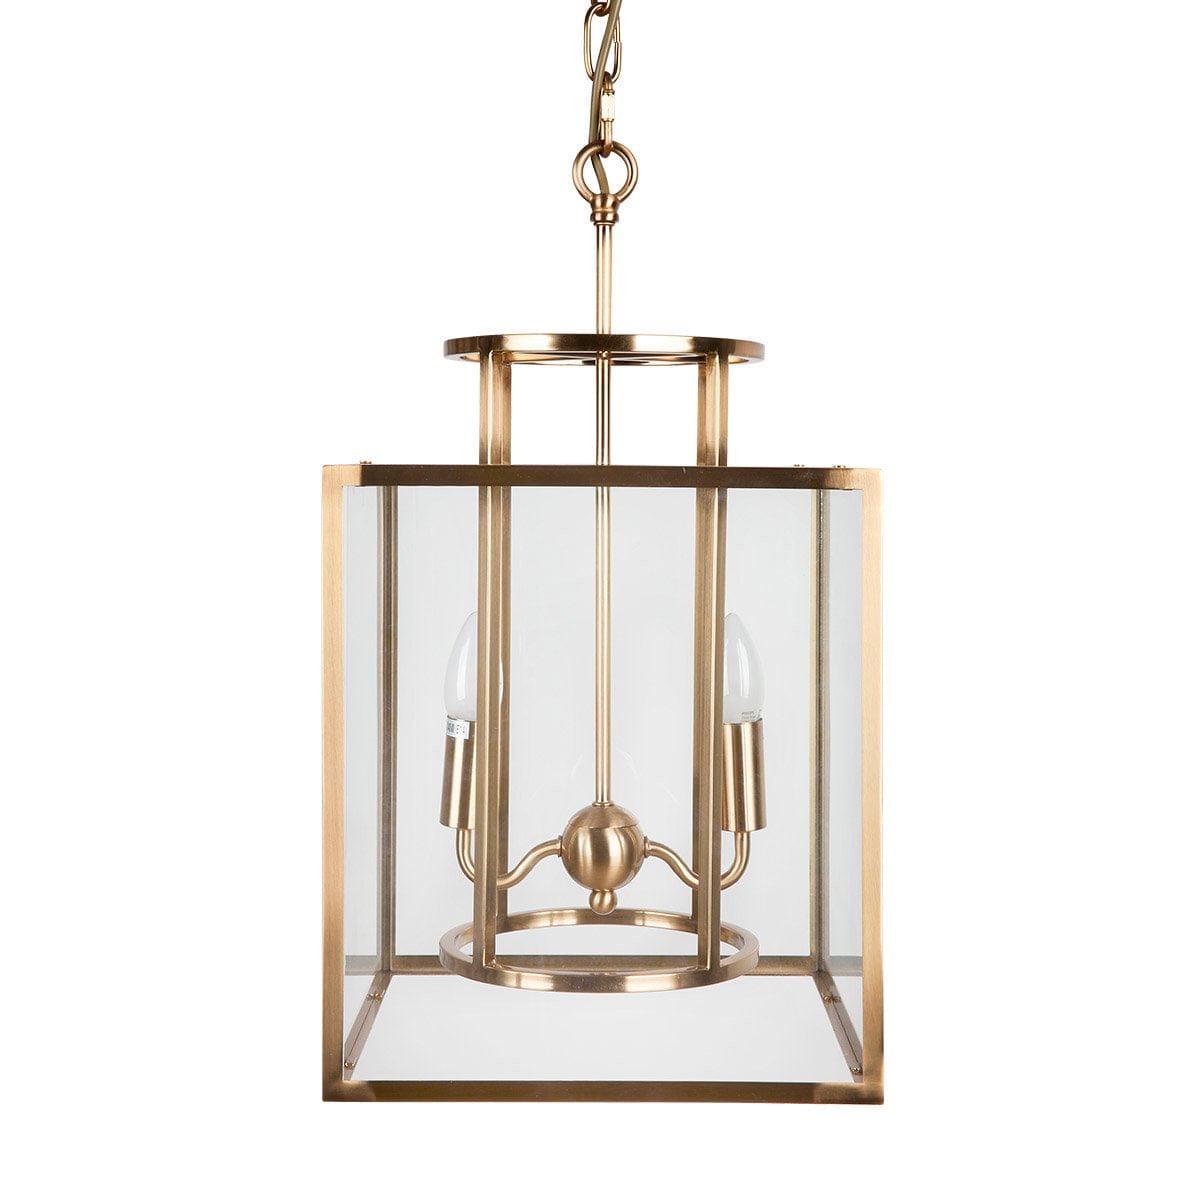 CAFE Lighting & Living Pendant CONCORD SMALL Polished Brass Glass Pendant 20711